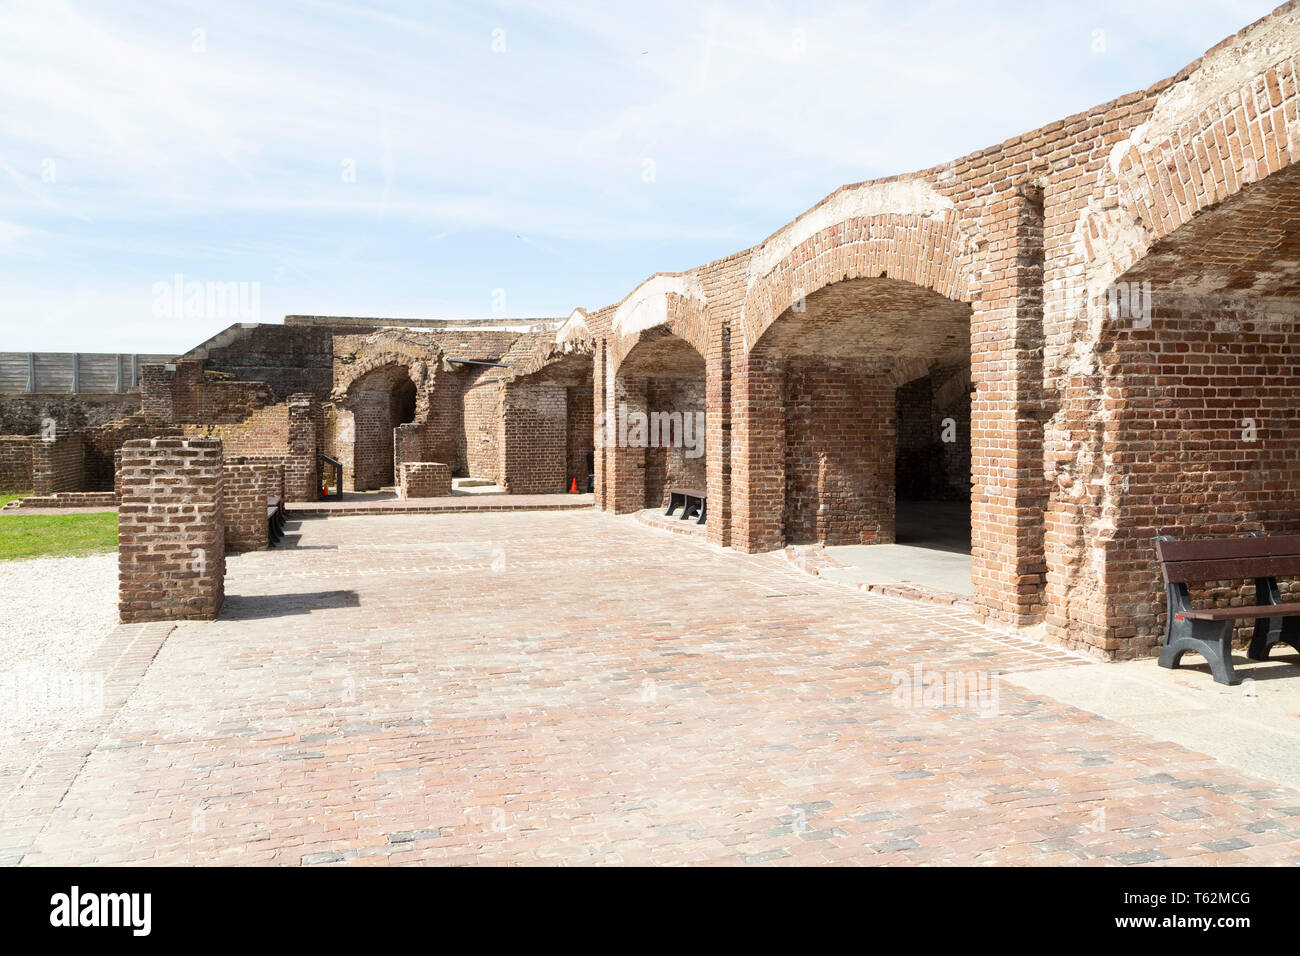 Casemates at Fort Sumter near Charleston in South Carolina, USA. The fort was the target of the opening shots of the American Civil War. Stock Photo